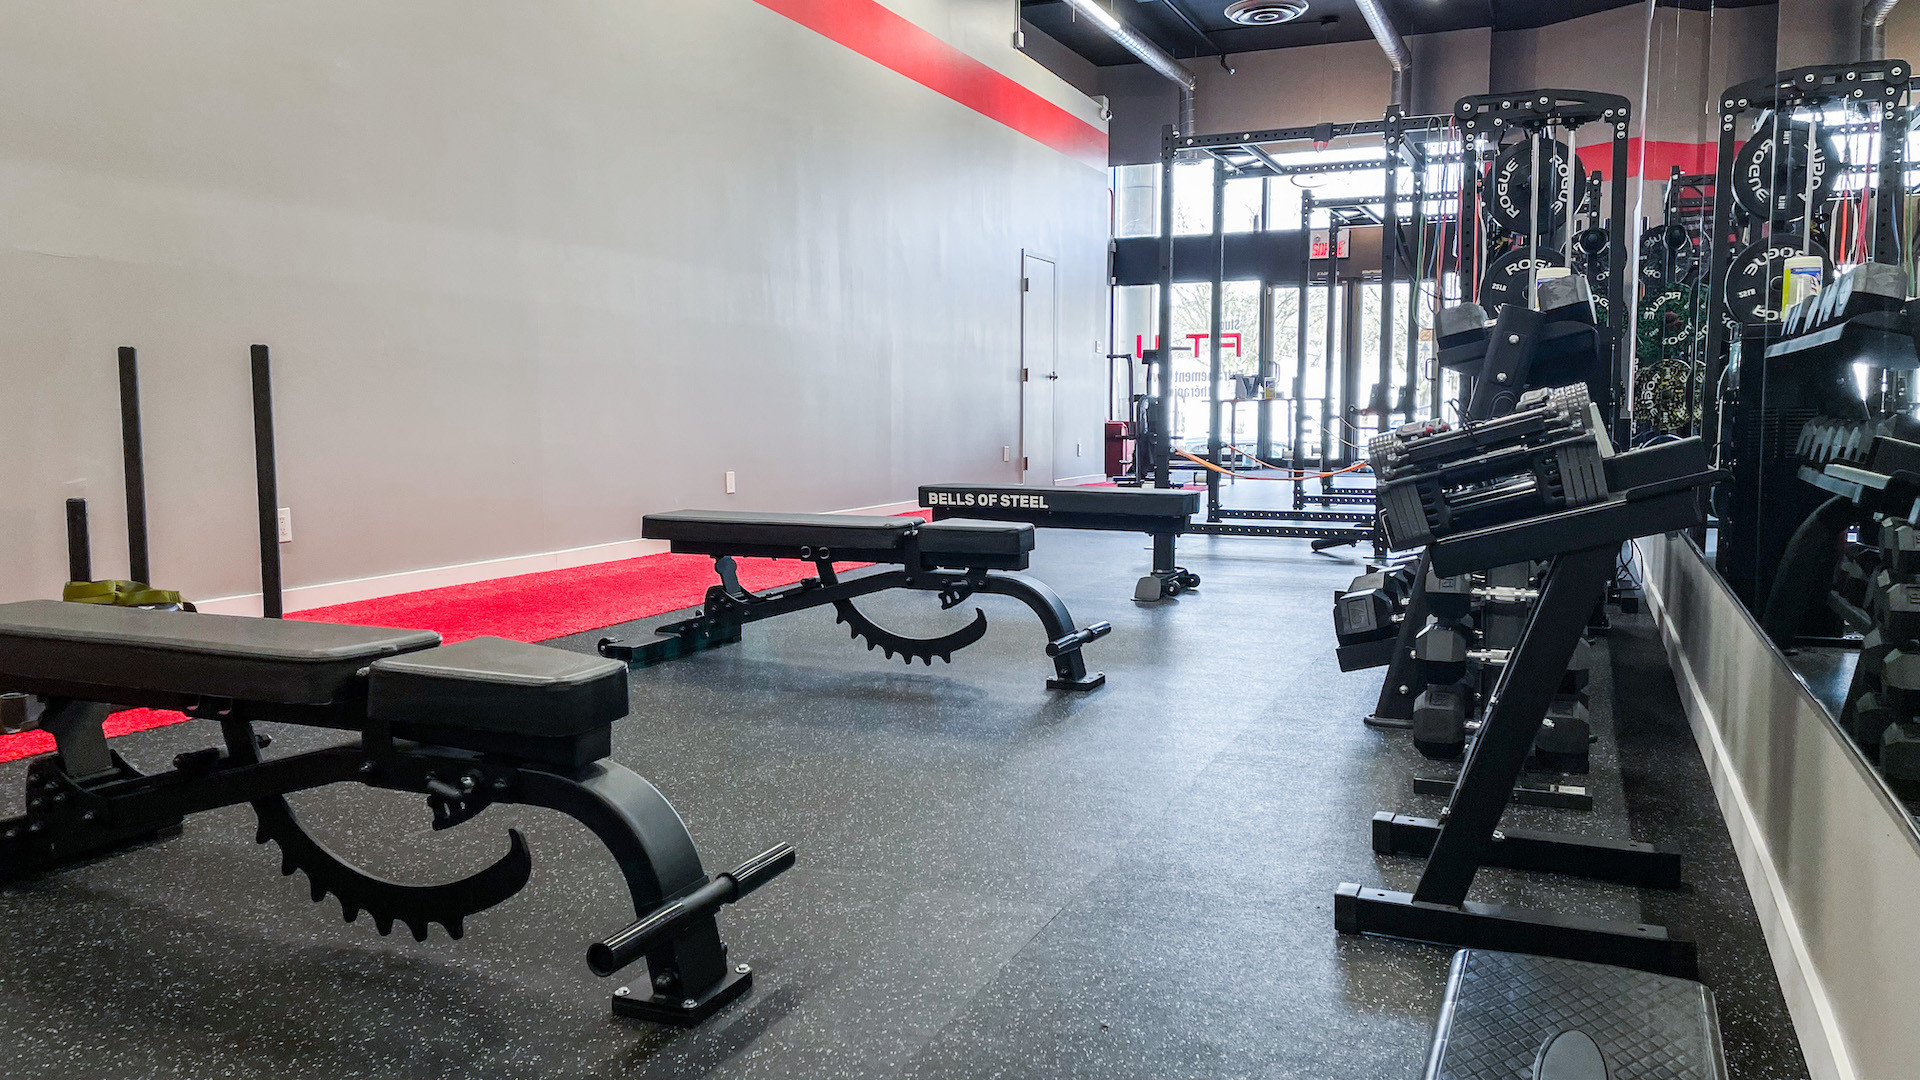 Summer is fast approaching, and you probably want to get in shape to feel good in your bathing suit. If you live in the Cotes des Neiges area of Montreal, you don't have to look far to find a place to exercise. In this article, we are going to introduce you to the 10 best gyms in Cotes des Neiges, with Studio Fit U at the top of the list. Whether you are looking for a family environment, a wide variety of classes or high quality training equipment, there is something for everyone.